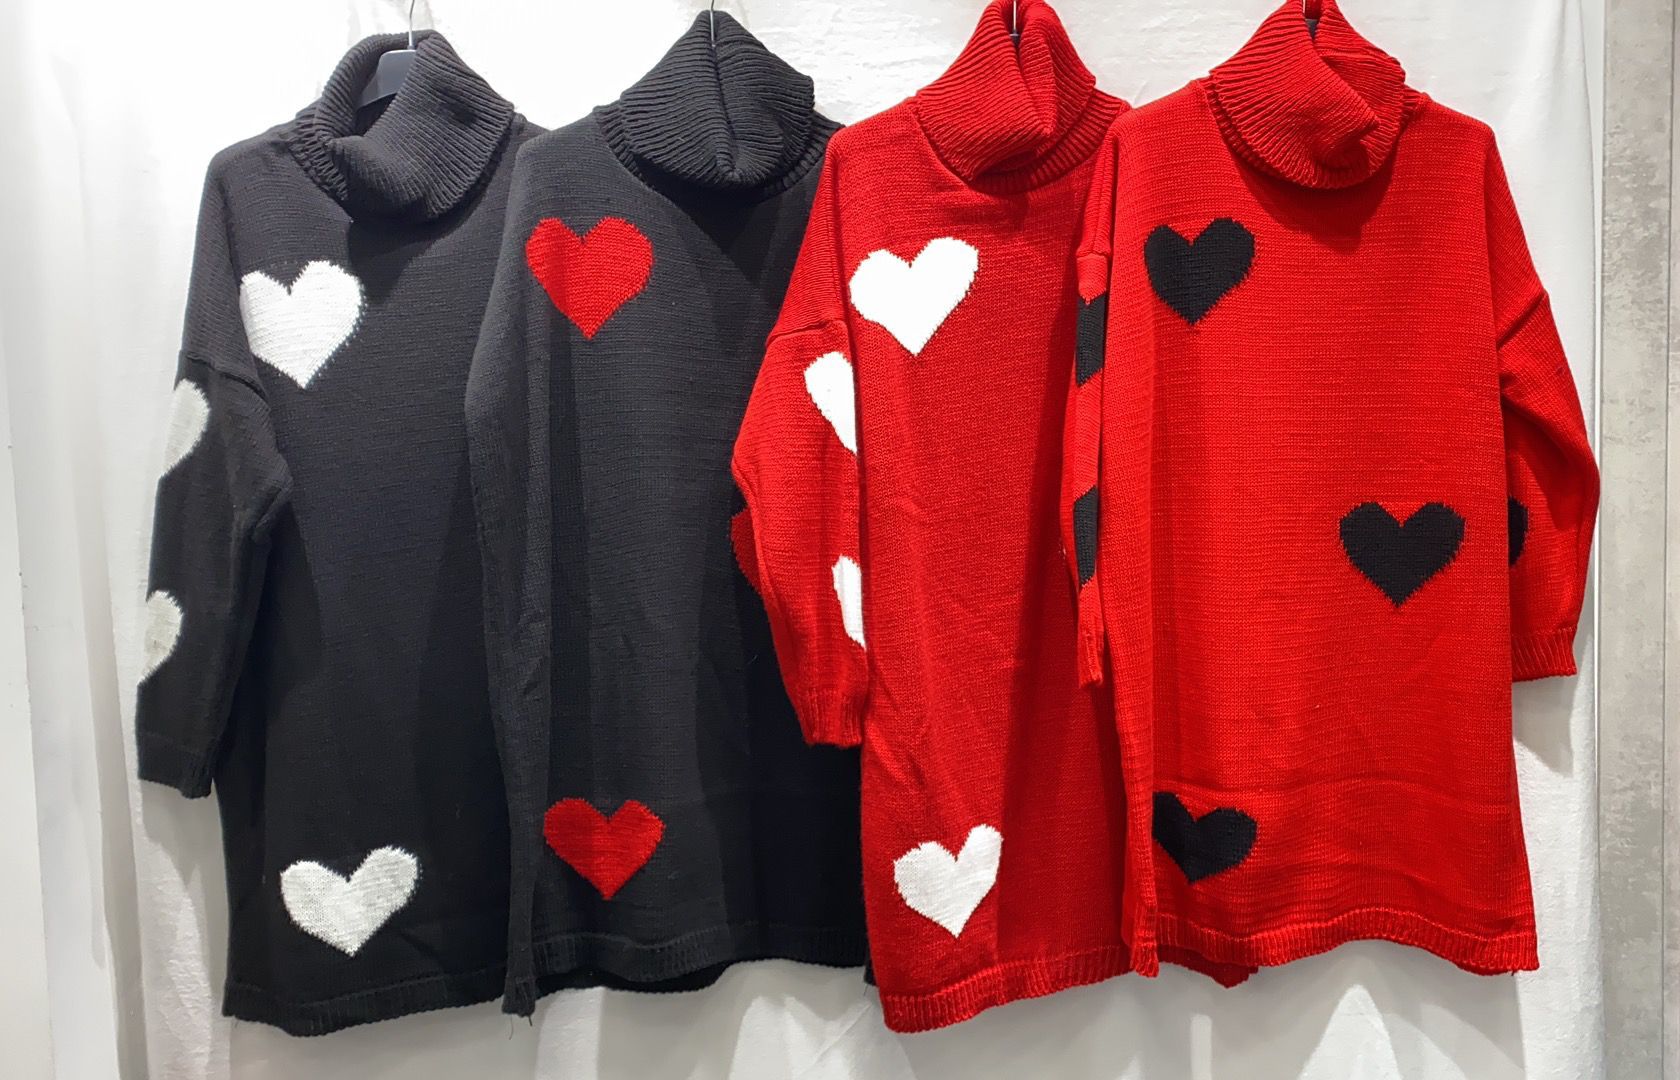 SWEATER DRESS WITH HEART